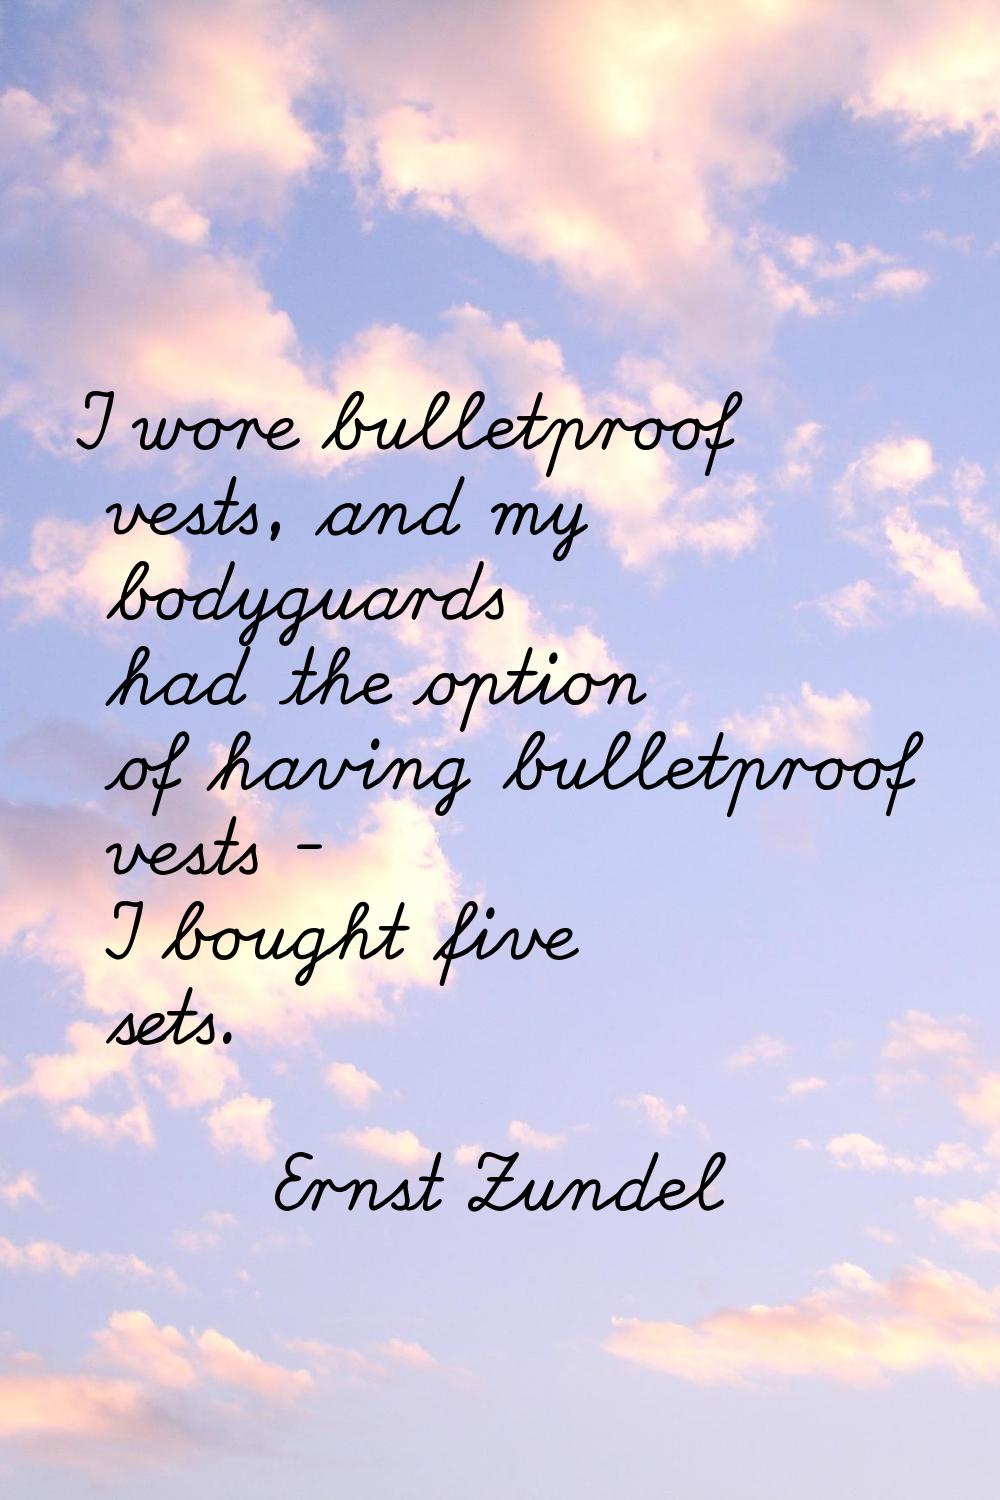 I wore bulletproof vests, and my bodyguards had the option of having bulletproof vests - I bought f